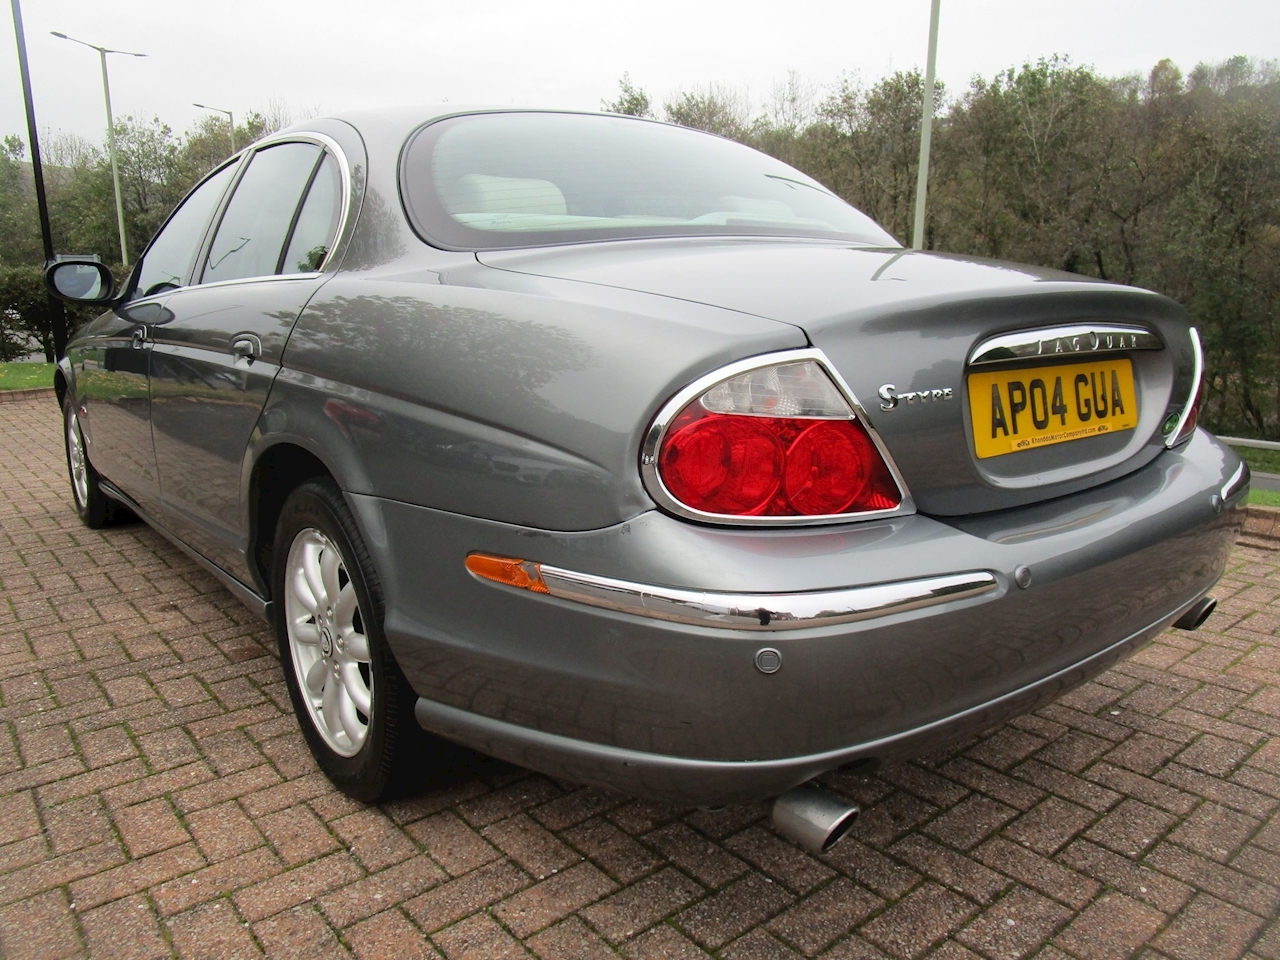 S-Type V6 Saloon 2.5 Automatic Petrol